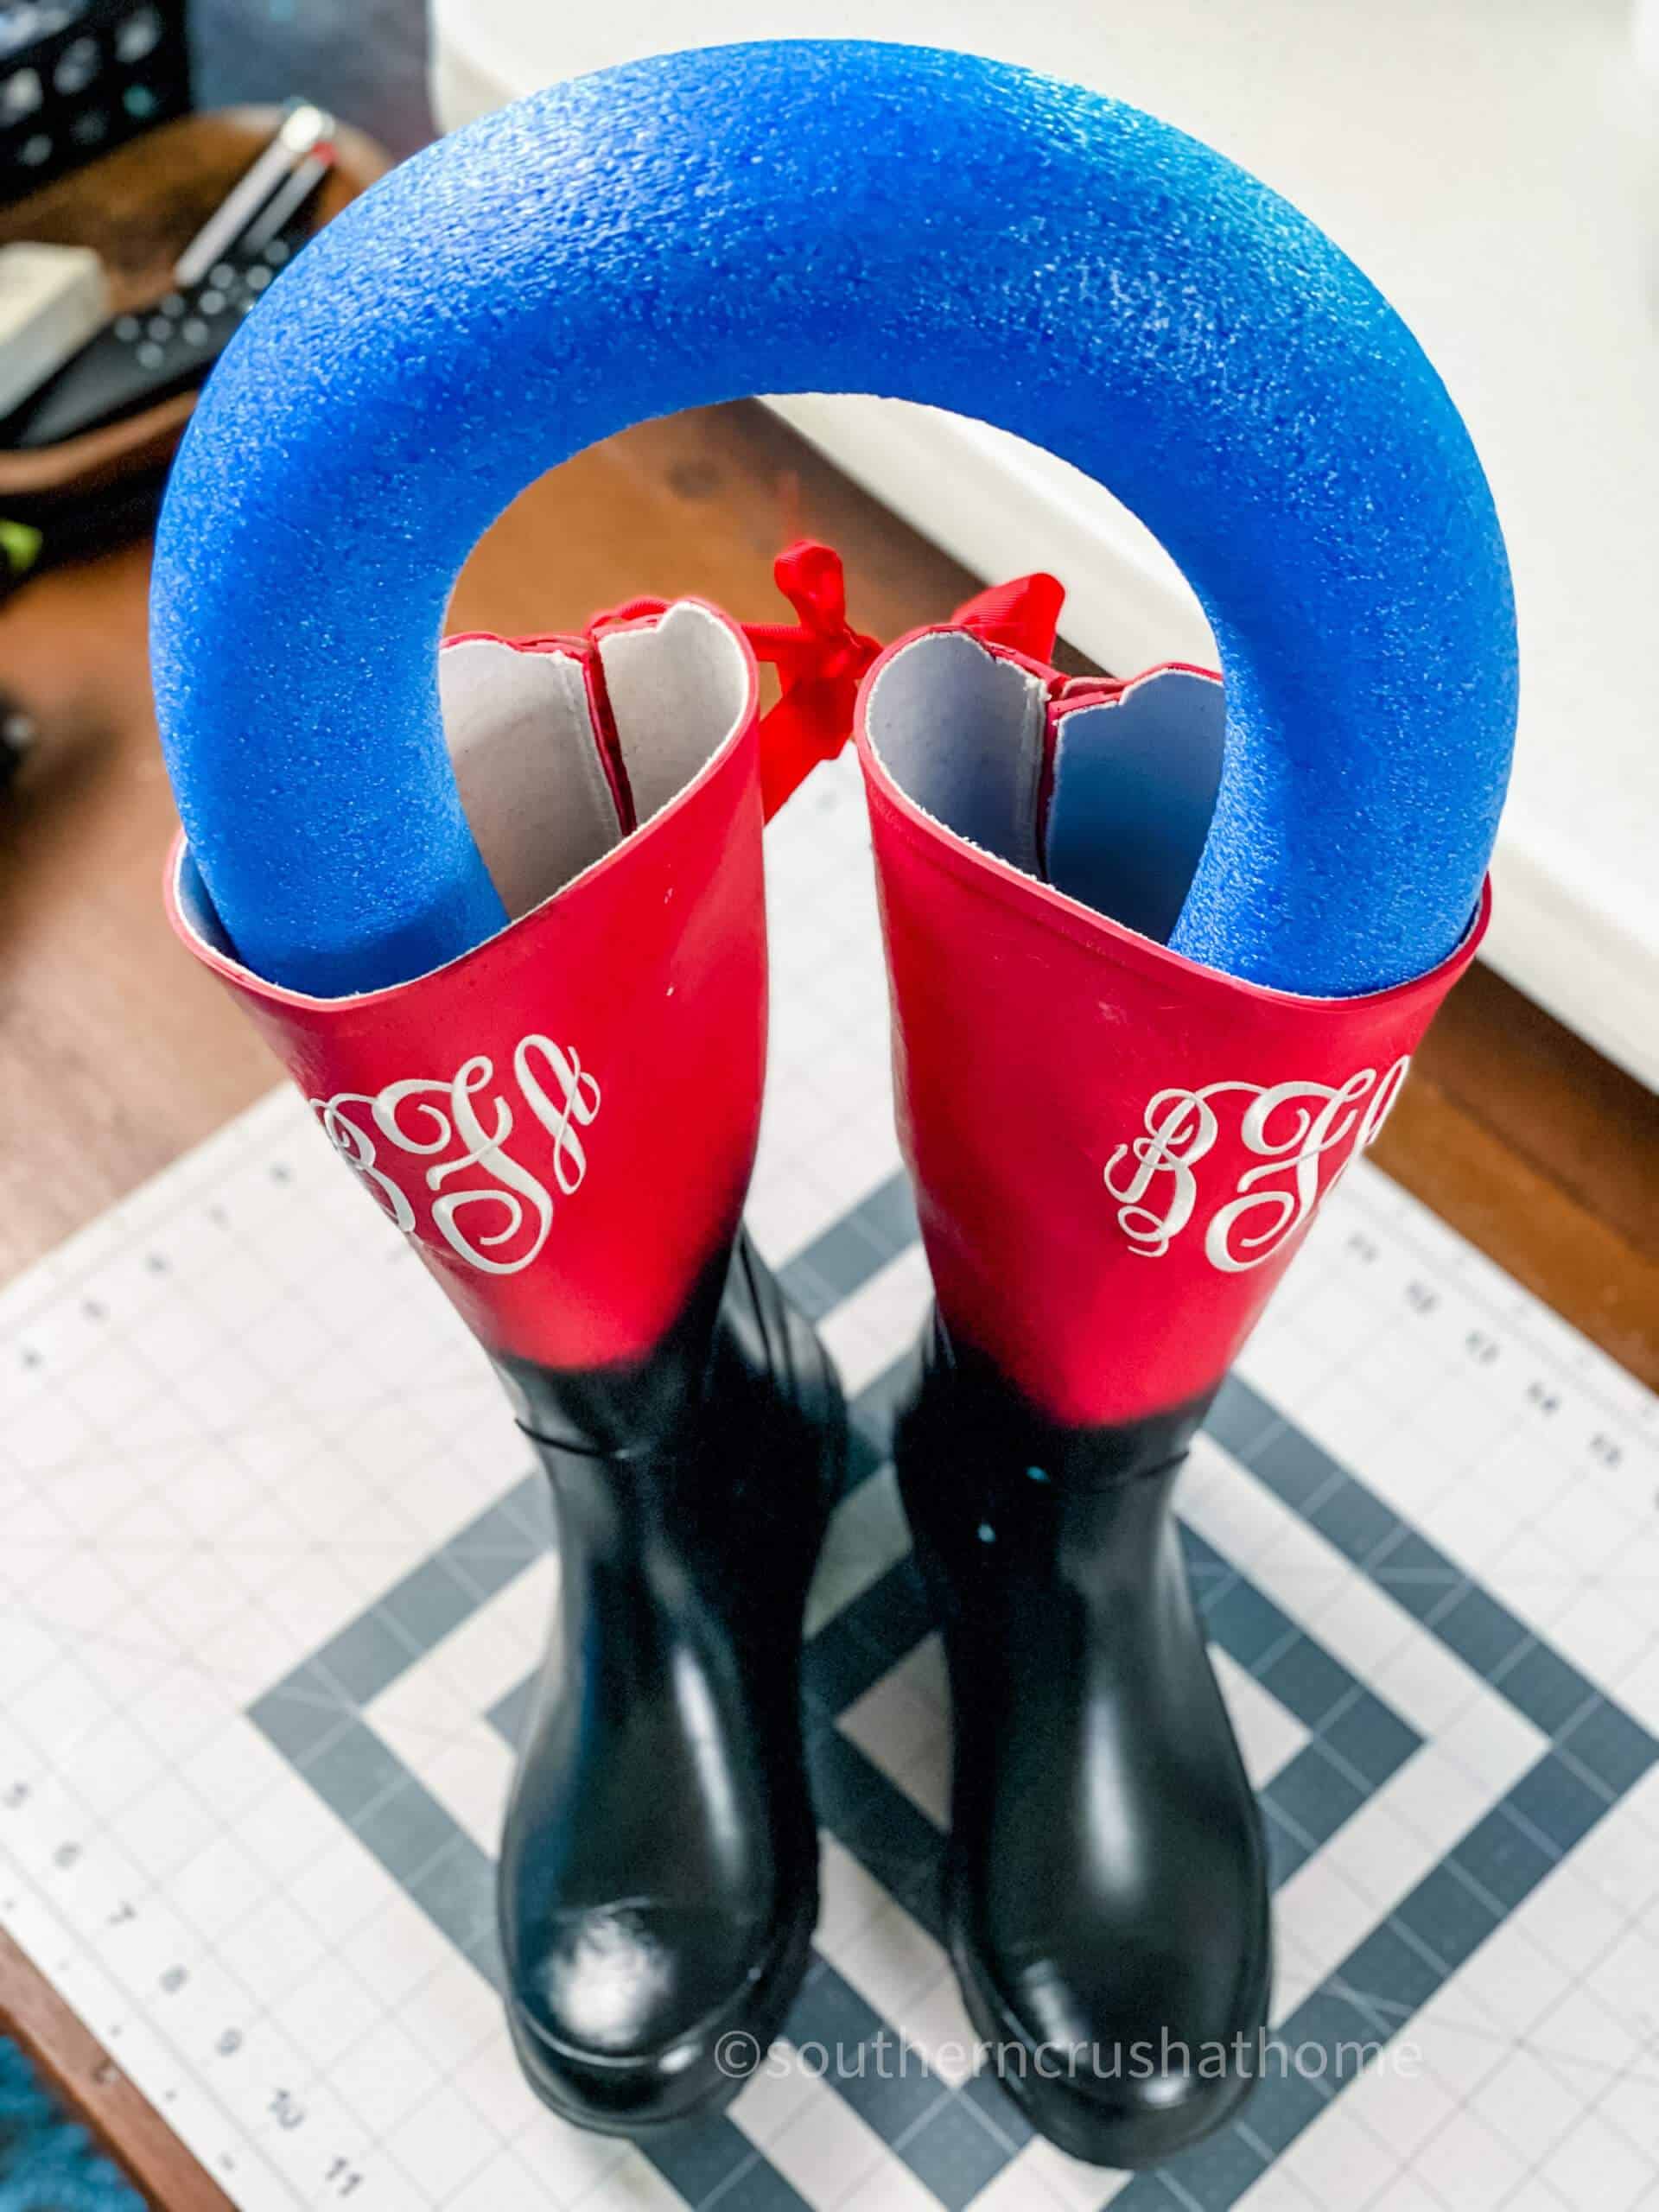 pool noodle arched in boots